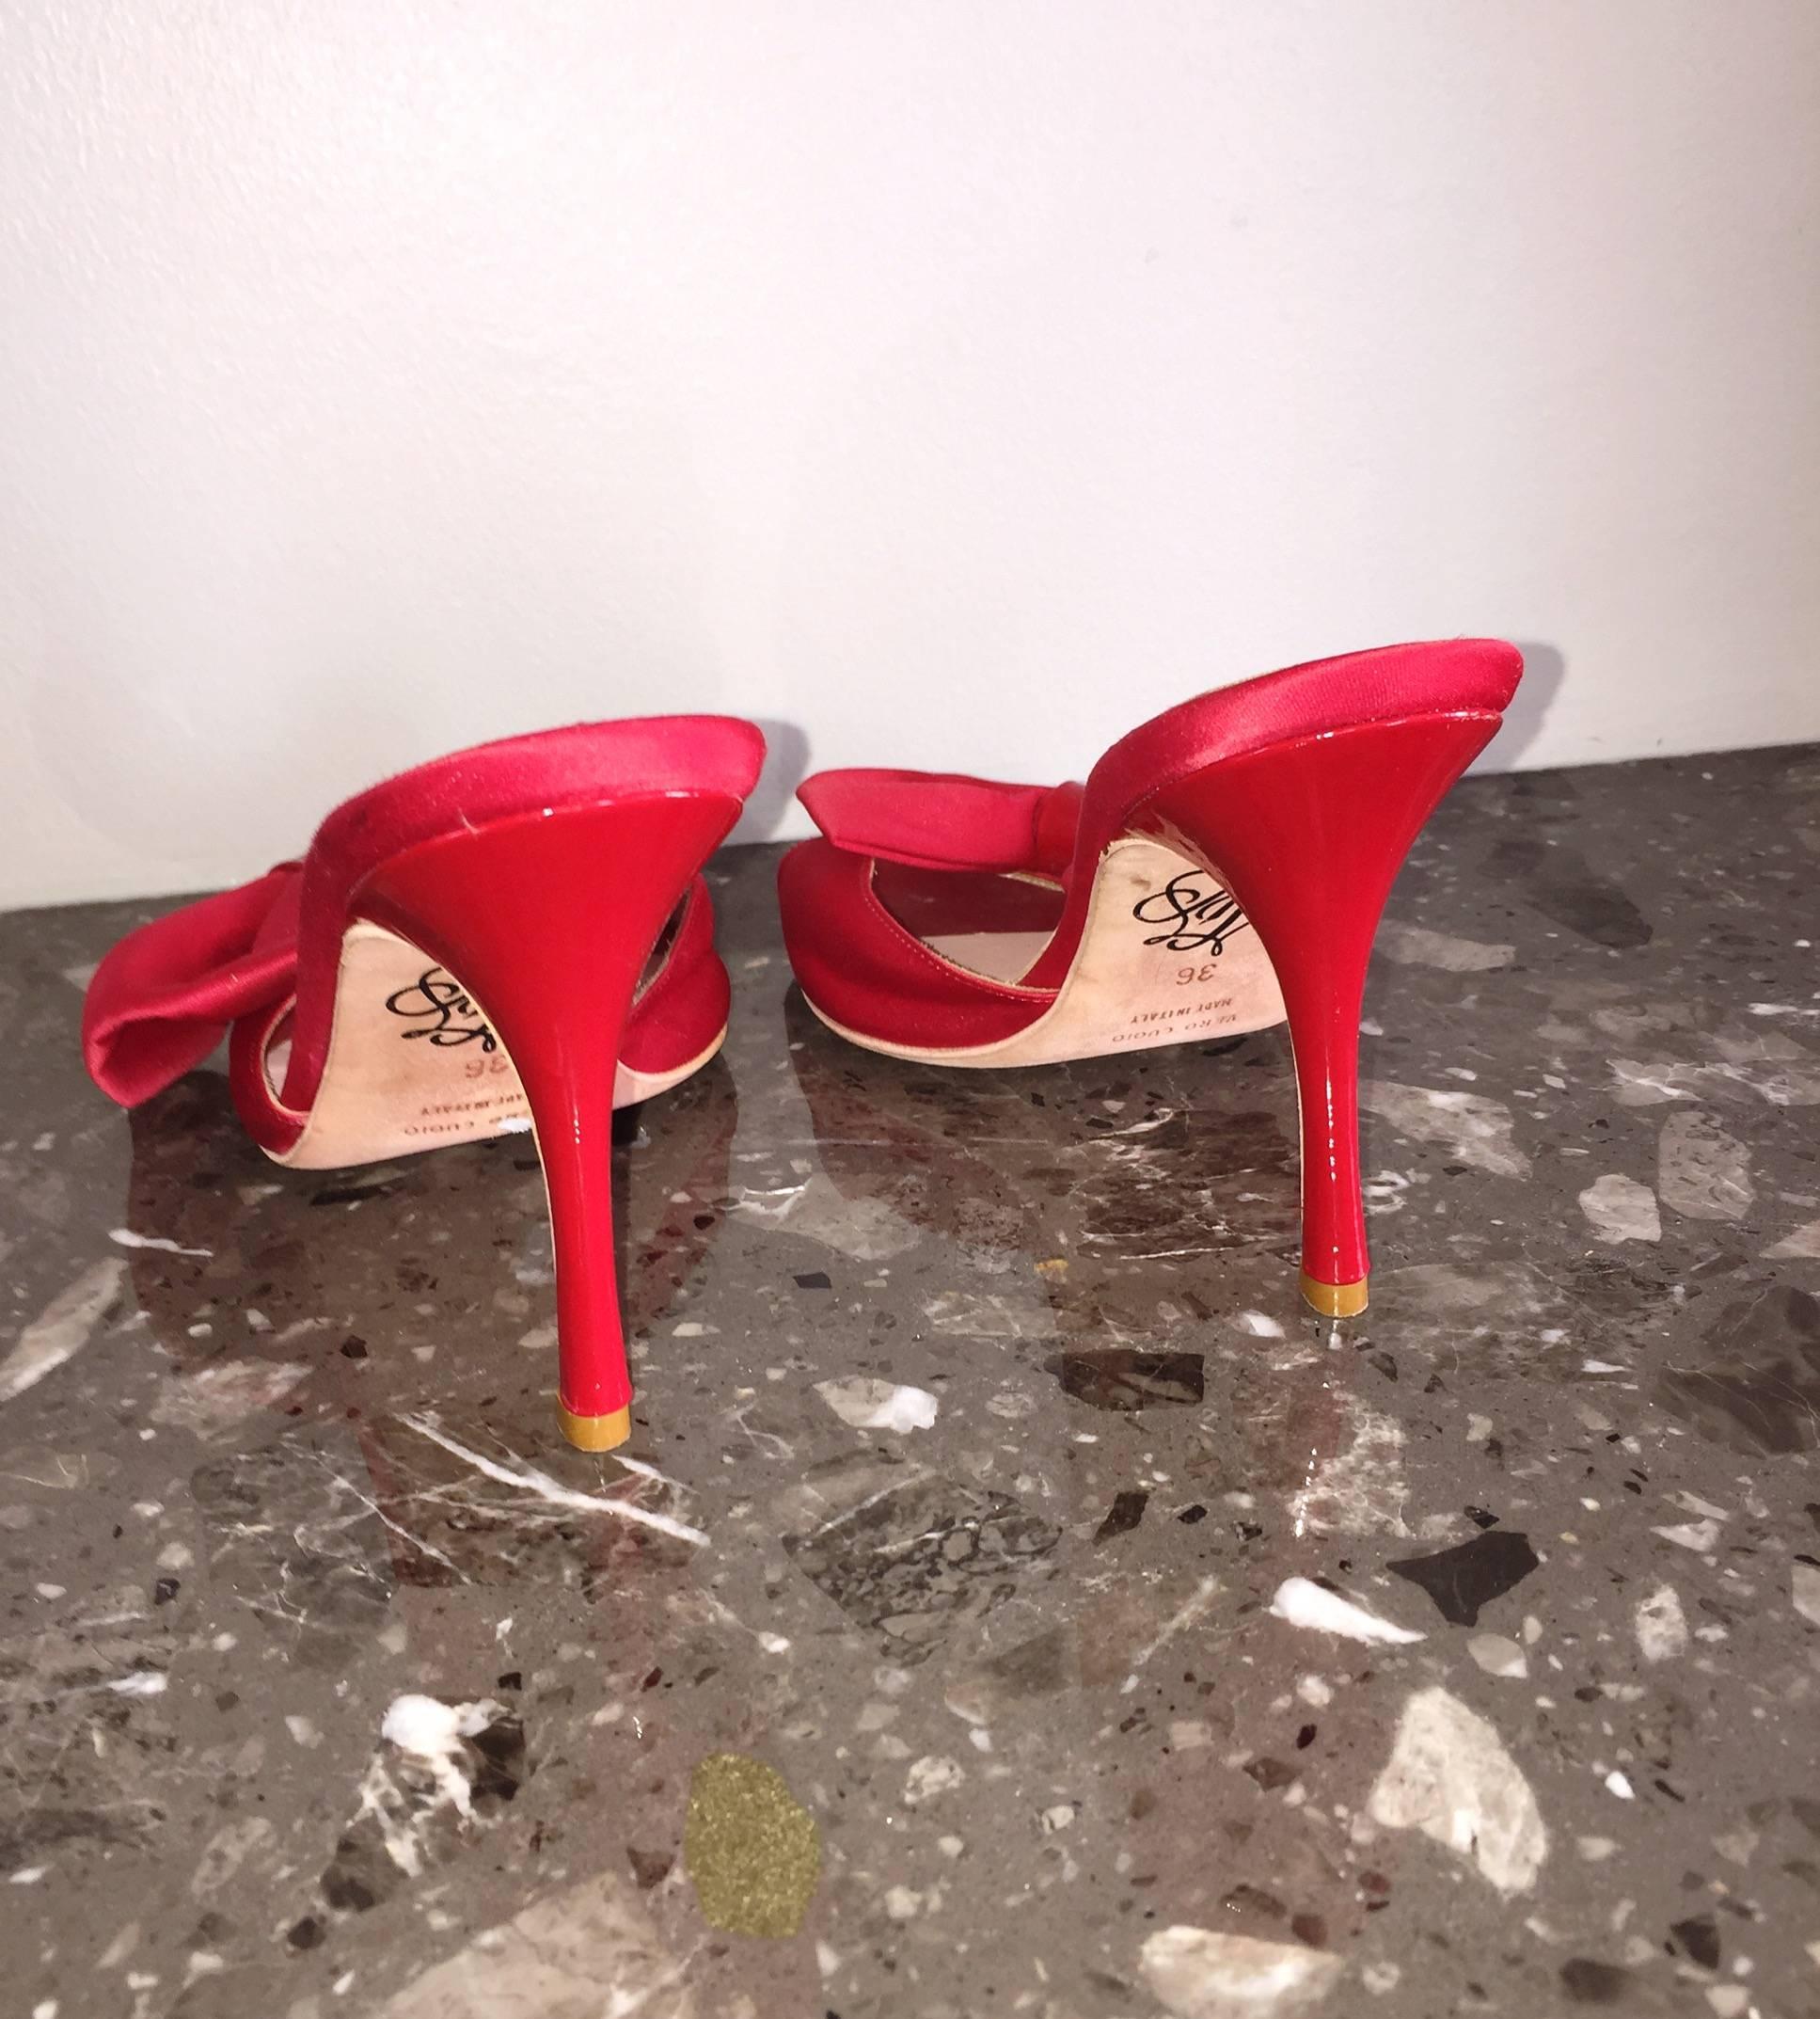 Sexy brand new, never worn  AGENT PROVOCATEUR red satin heels! 1950s sex appeal, with a modern twist. Features a bow at each side, with red patent leather accent. Perfect with jeans or shorts, yet impressive with a dress, or evening gown! Made in